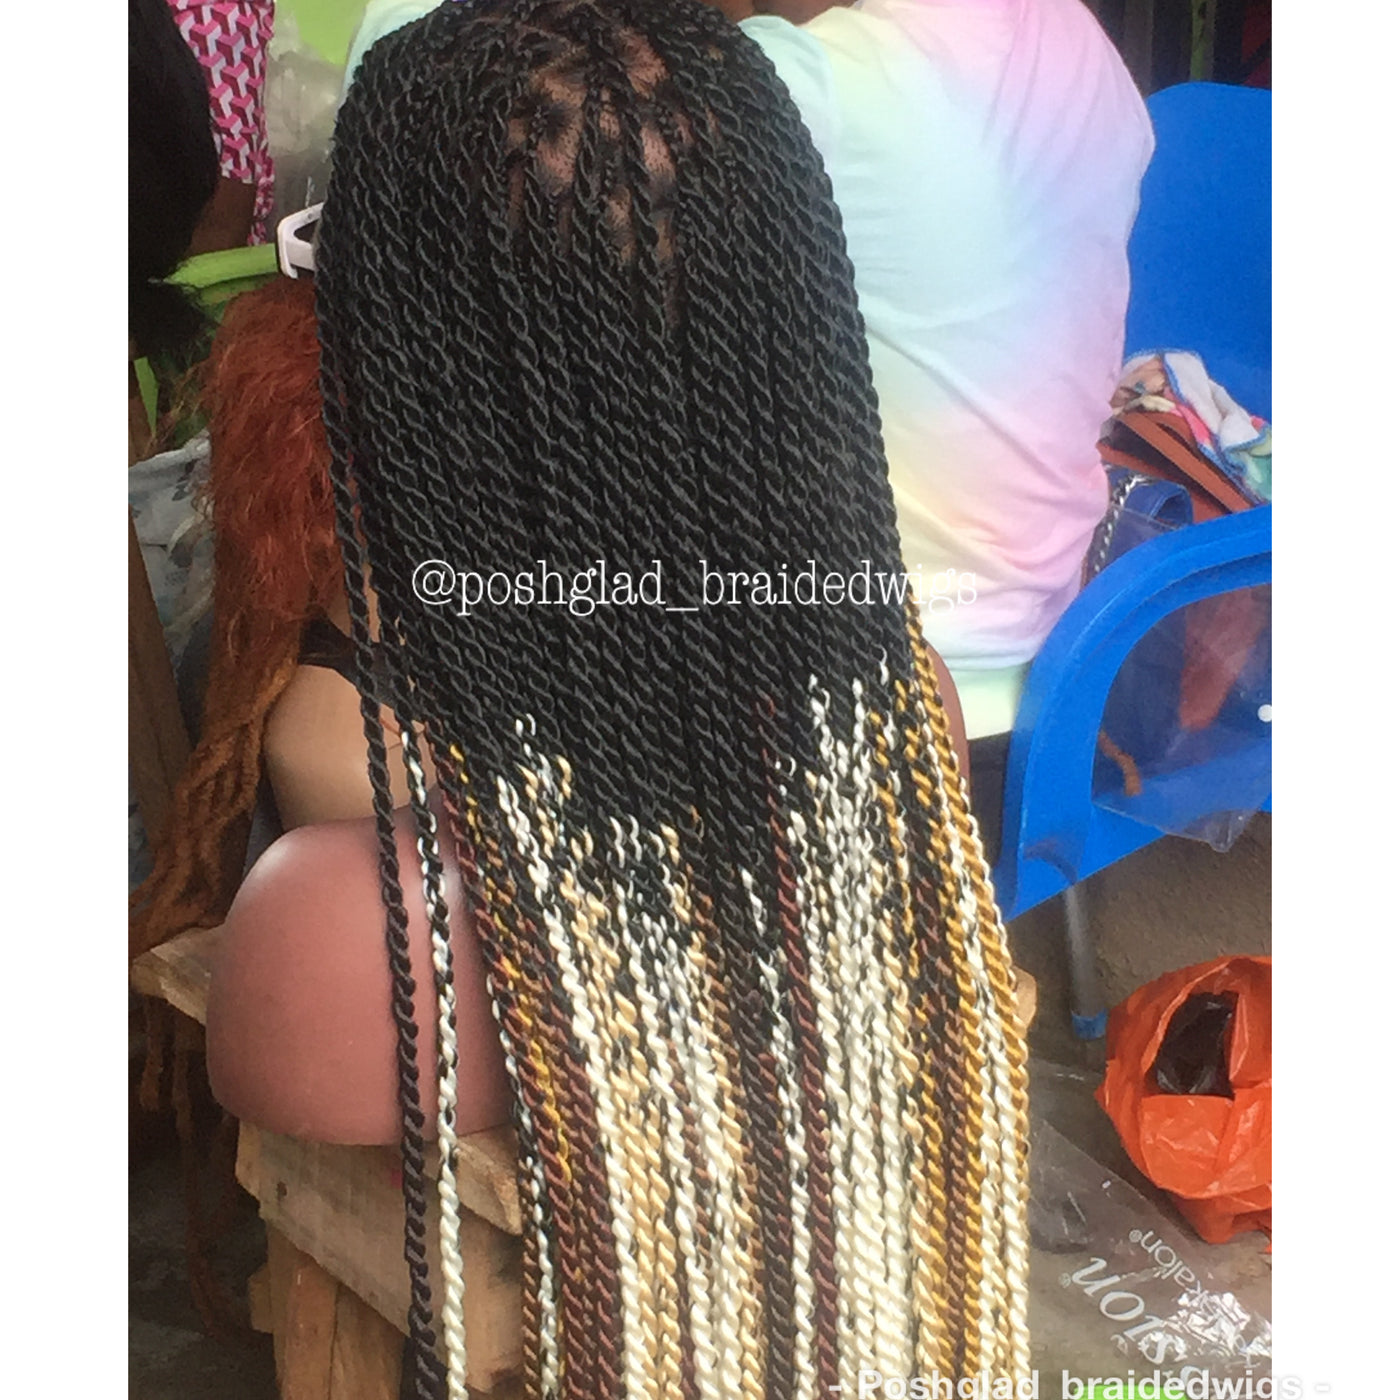 SHADE KNOTLESS (FULL LACE) Poshglad Braided Wigs KNOTLESS